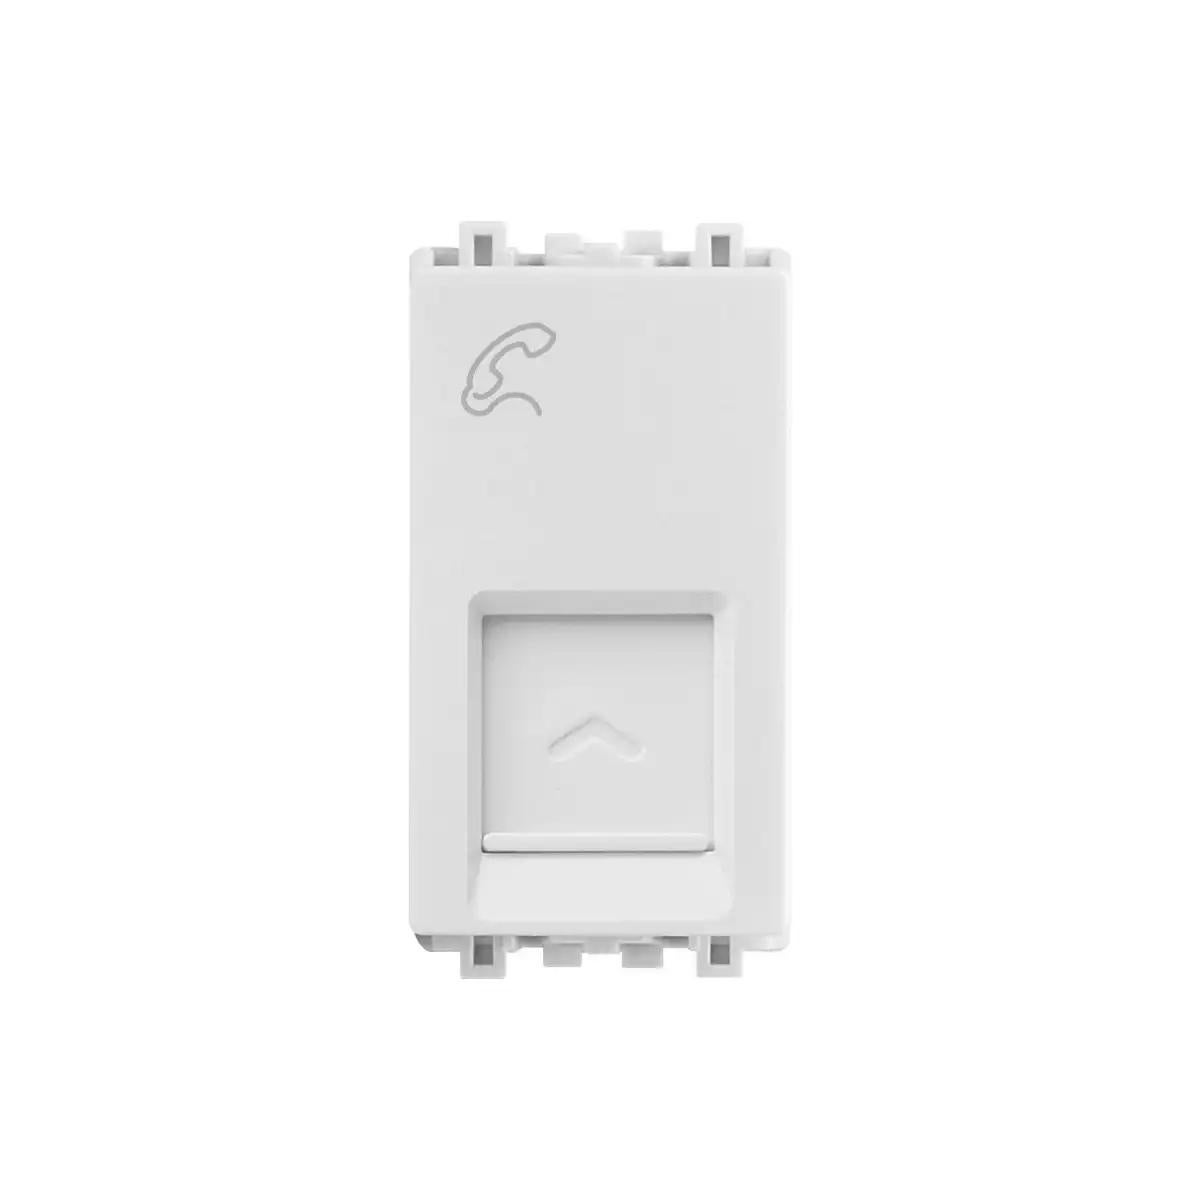 Telephone Outlet with Shutter 1M Sized Module, Horizontal, White